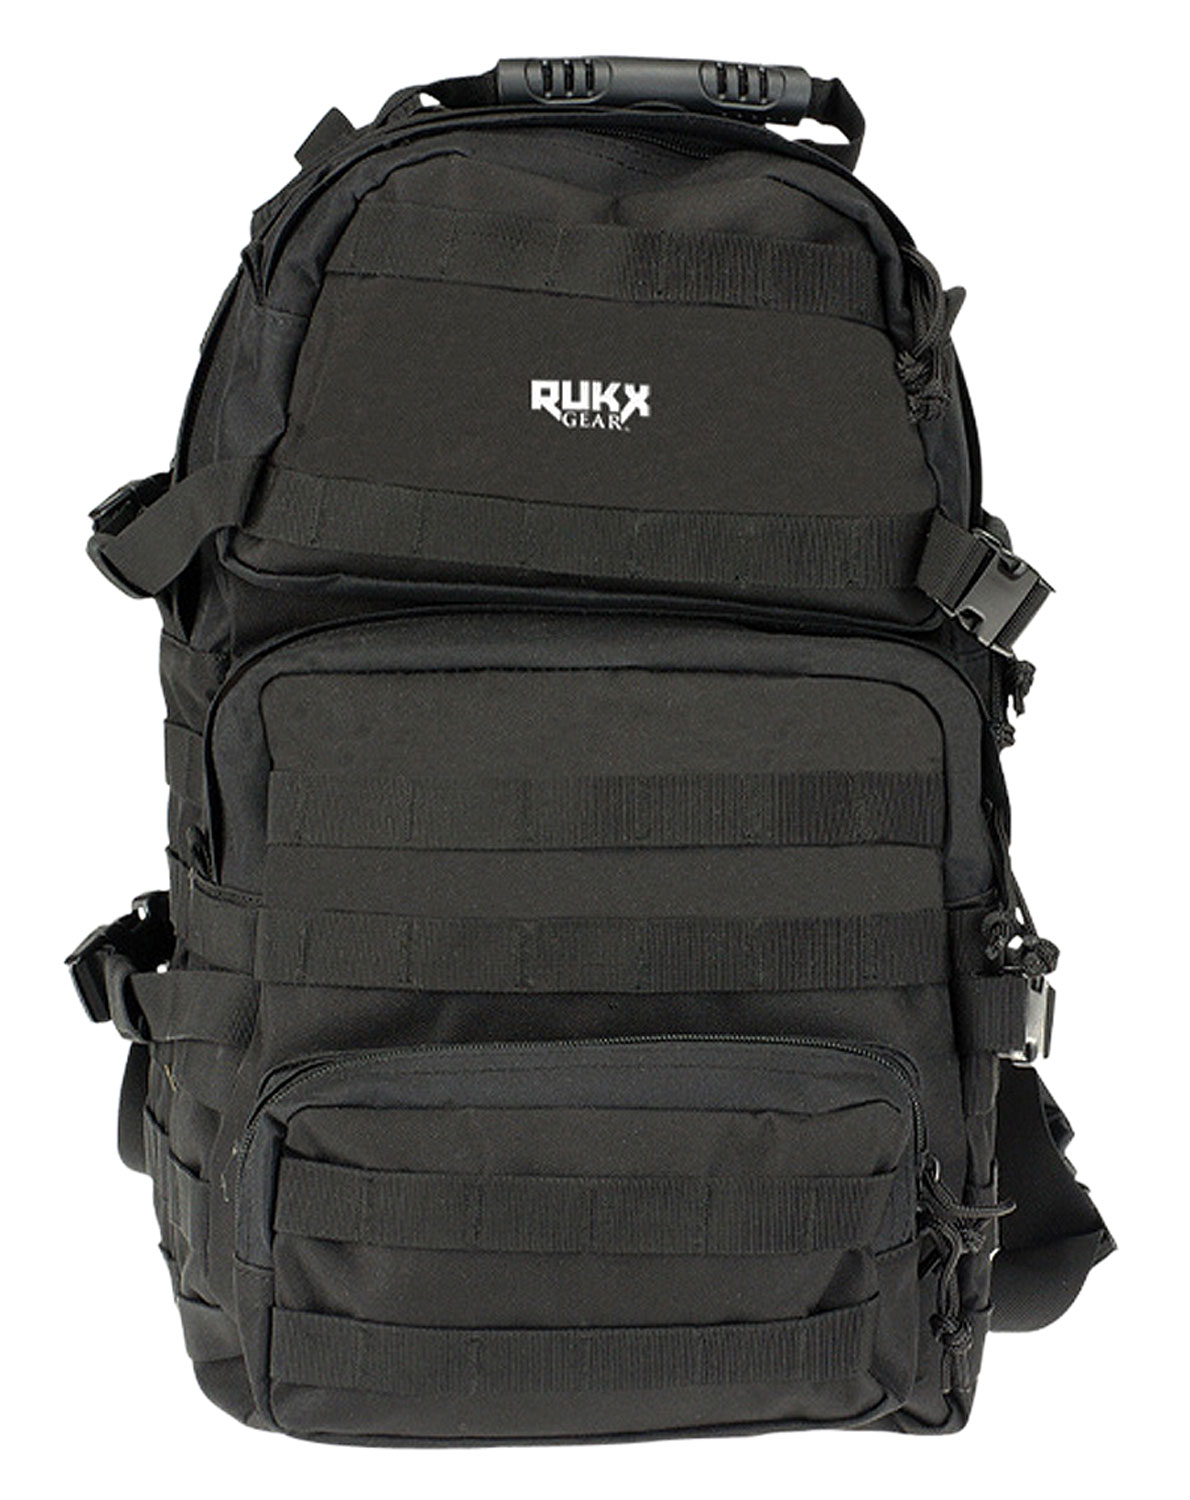 Rukx Gear ATICT3DB Tactical 3 Day Water Resistant Black 600D Polyester with Molle Webbing, Hook & Loop Panel, 4 Storage Areas 16